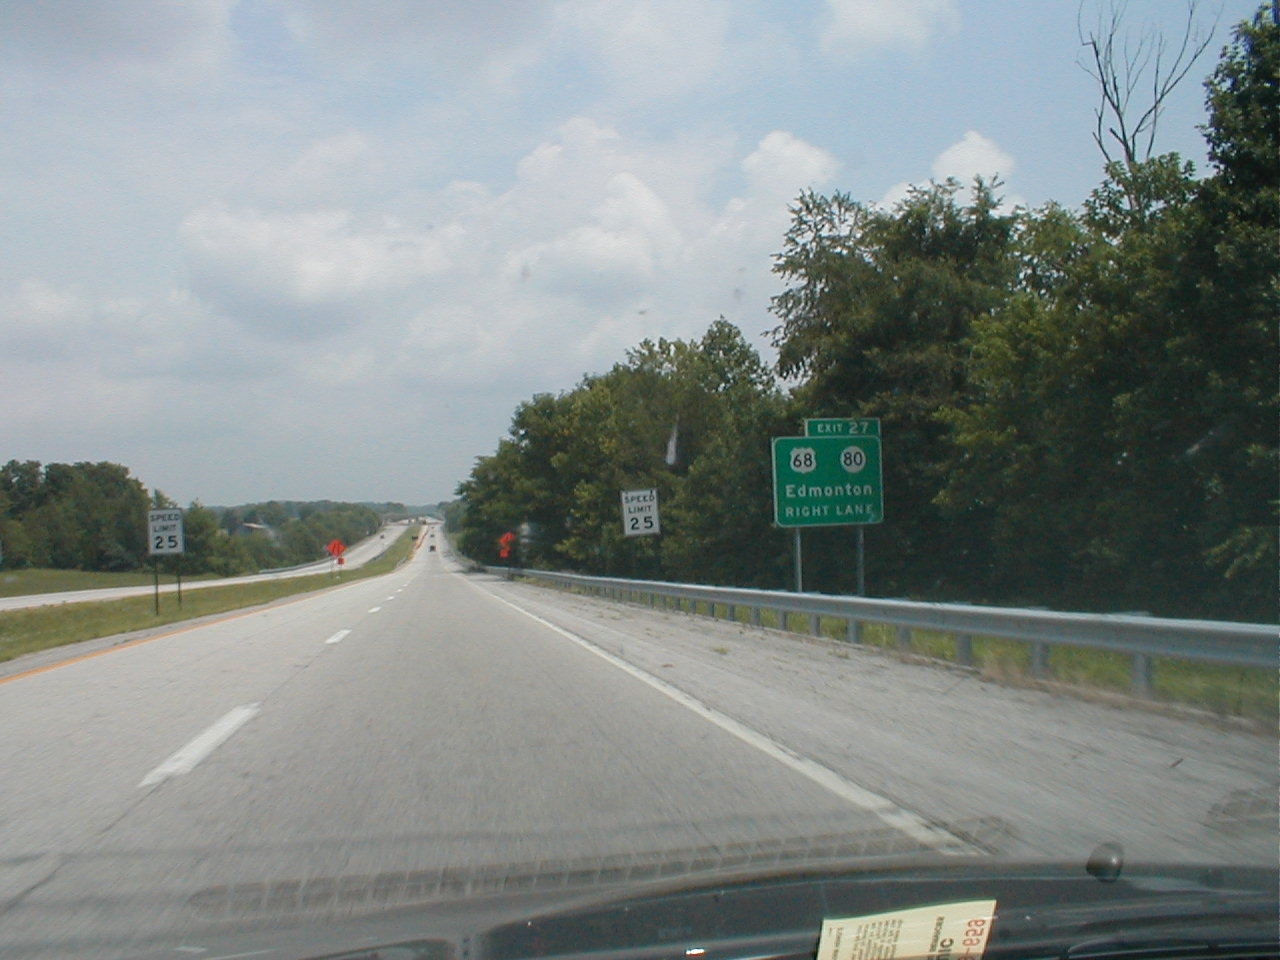 Approach to former toll booths at Exit 27